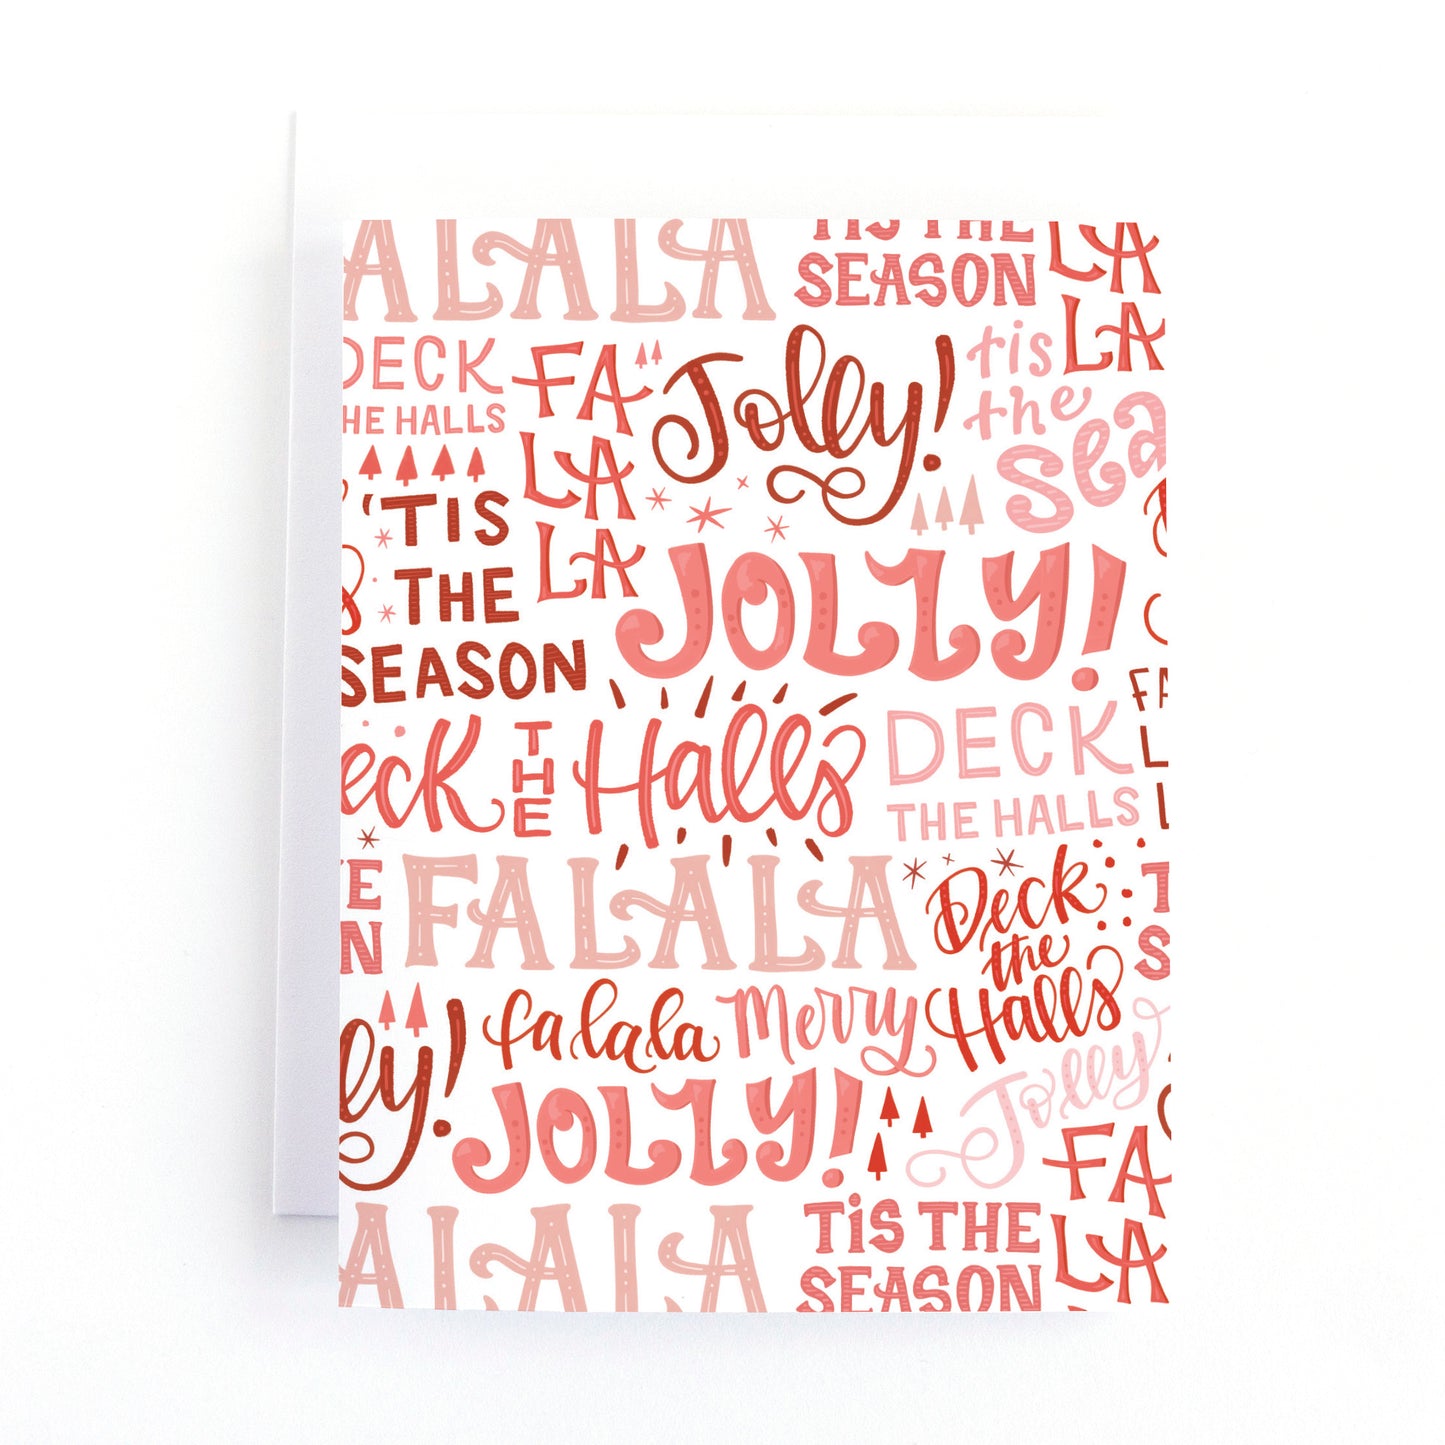 Christmas card with a hand lettered word collage of the lyrics to deck the halls